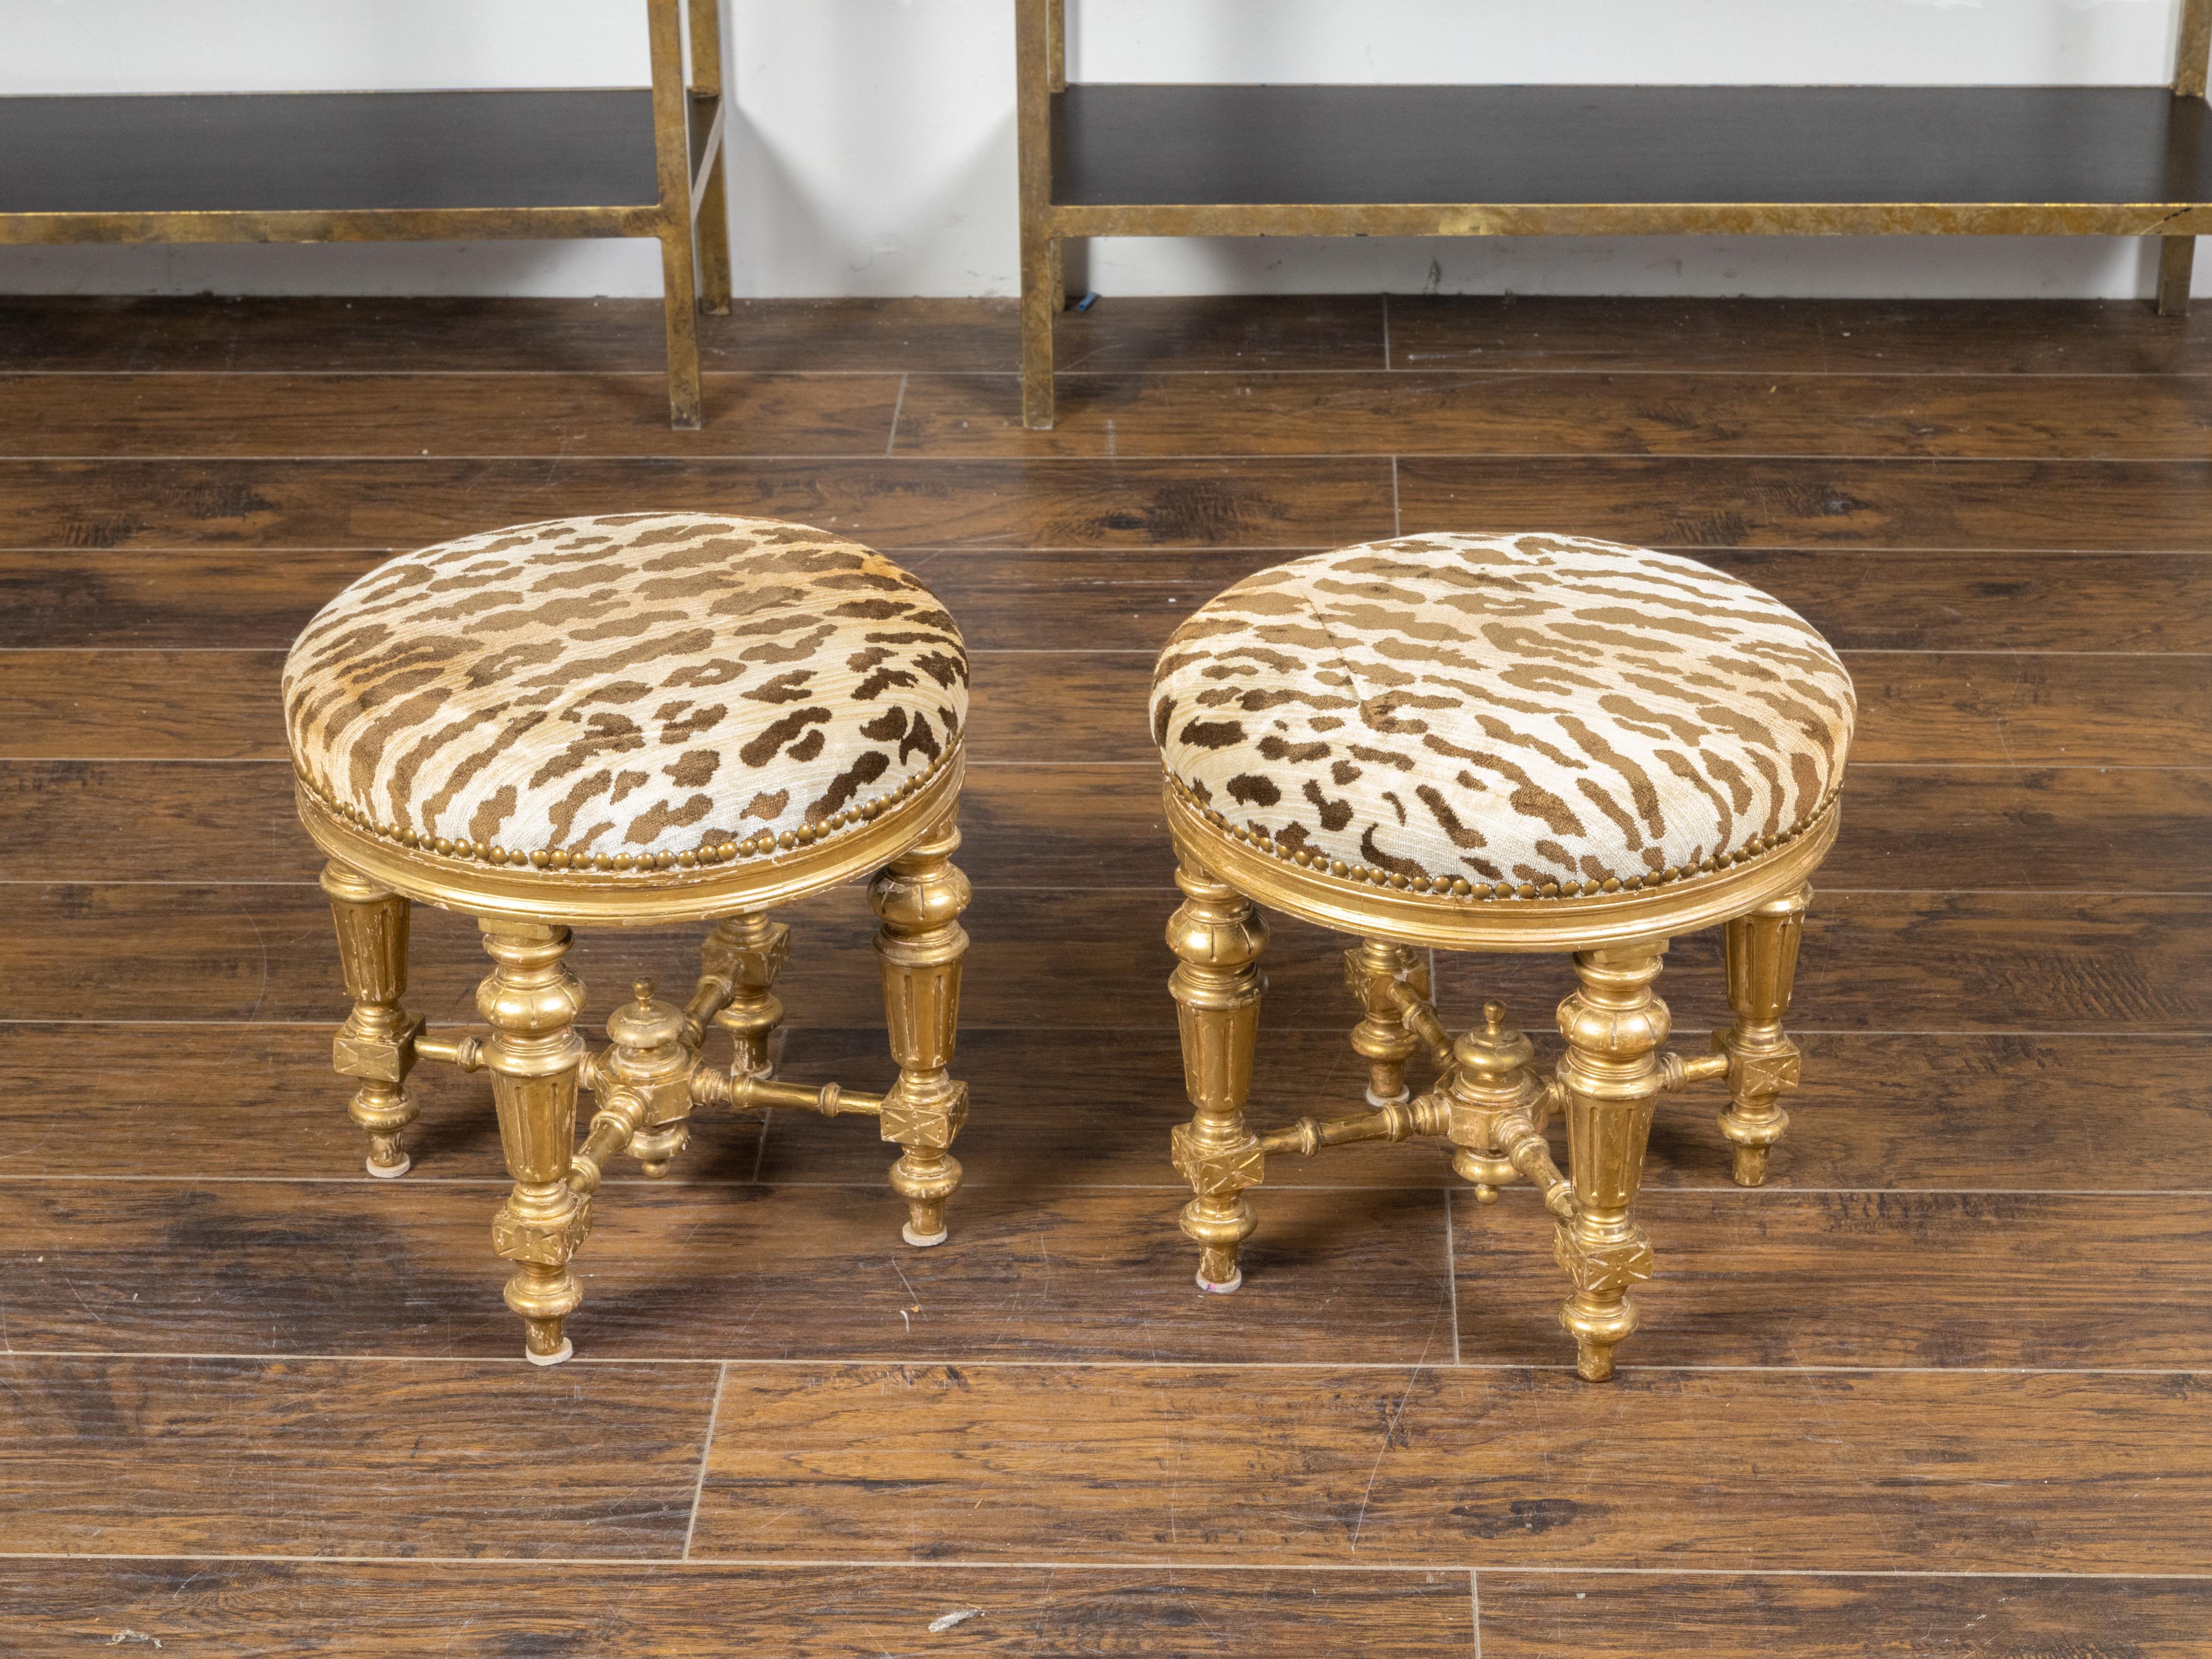 A pair of French giltwood stools from the 19th century, with fluted legs, cross stretchers and leopard style upholstery. Created in France during the 19th century, each of this pair of giltwood stools features a circular seat covered with a leopard